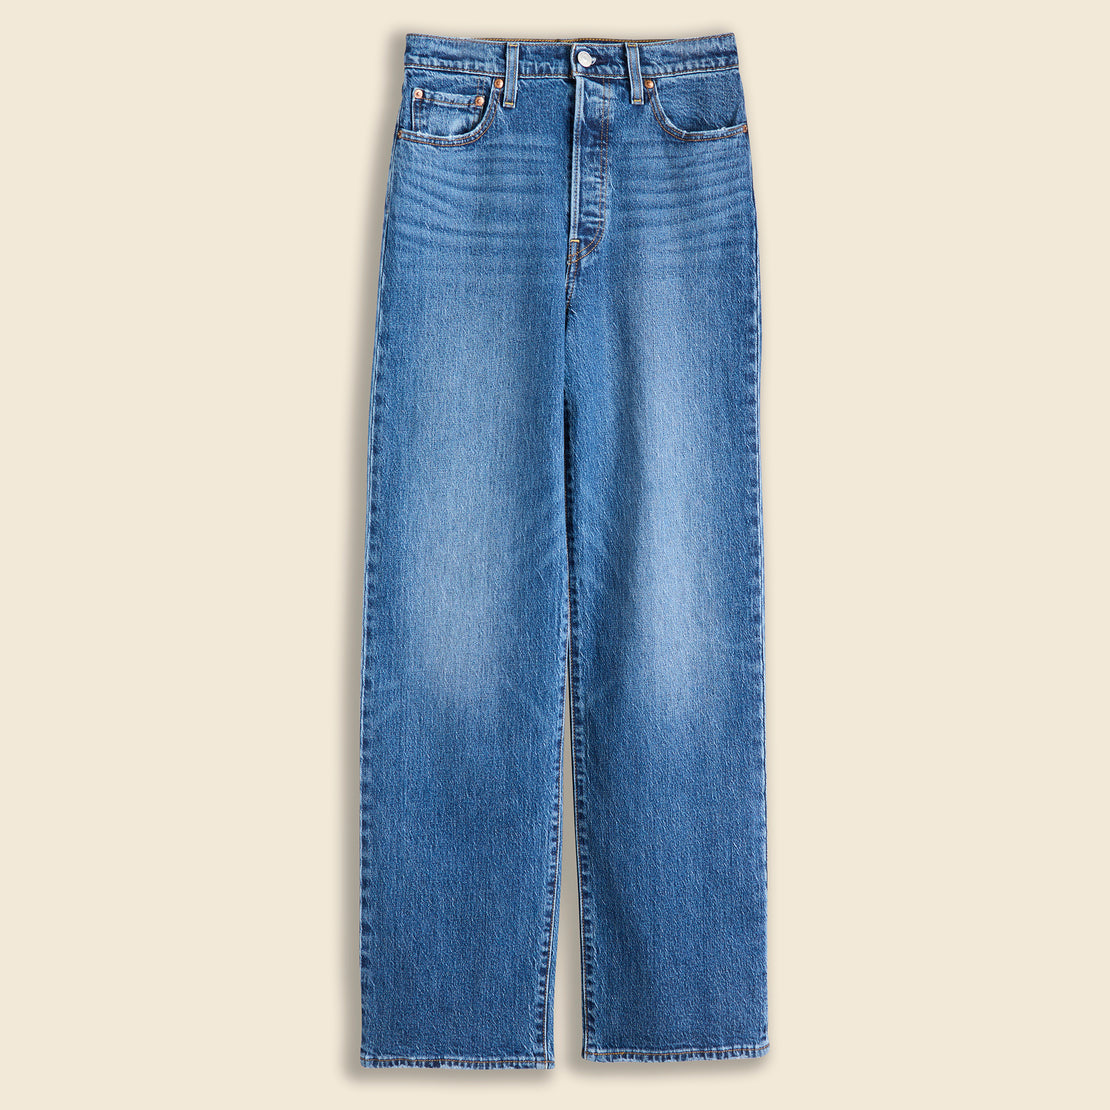 Levis Premium Ribcage Full Length- Valley View